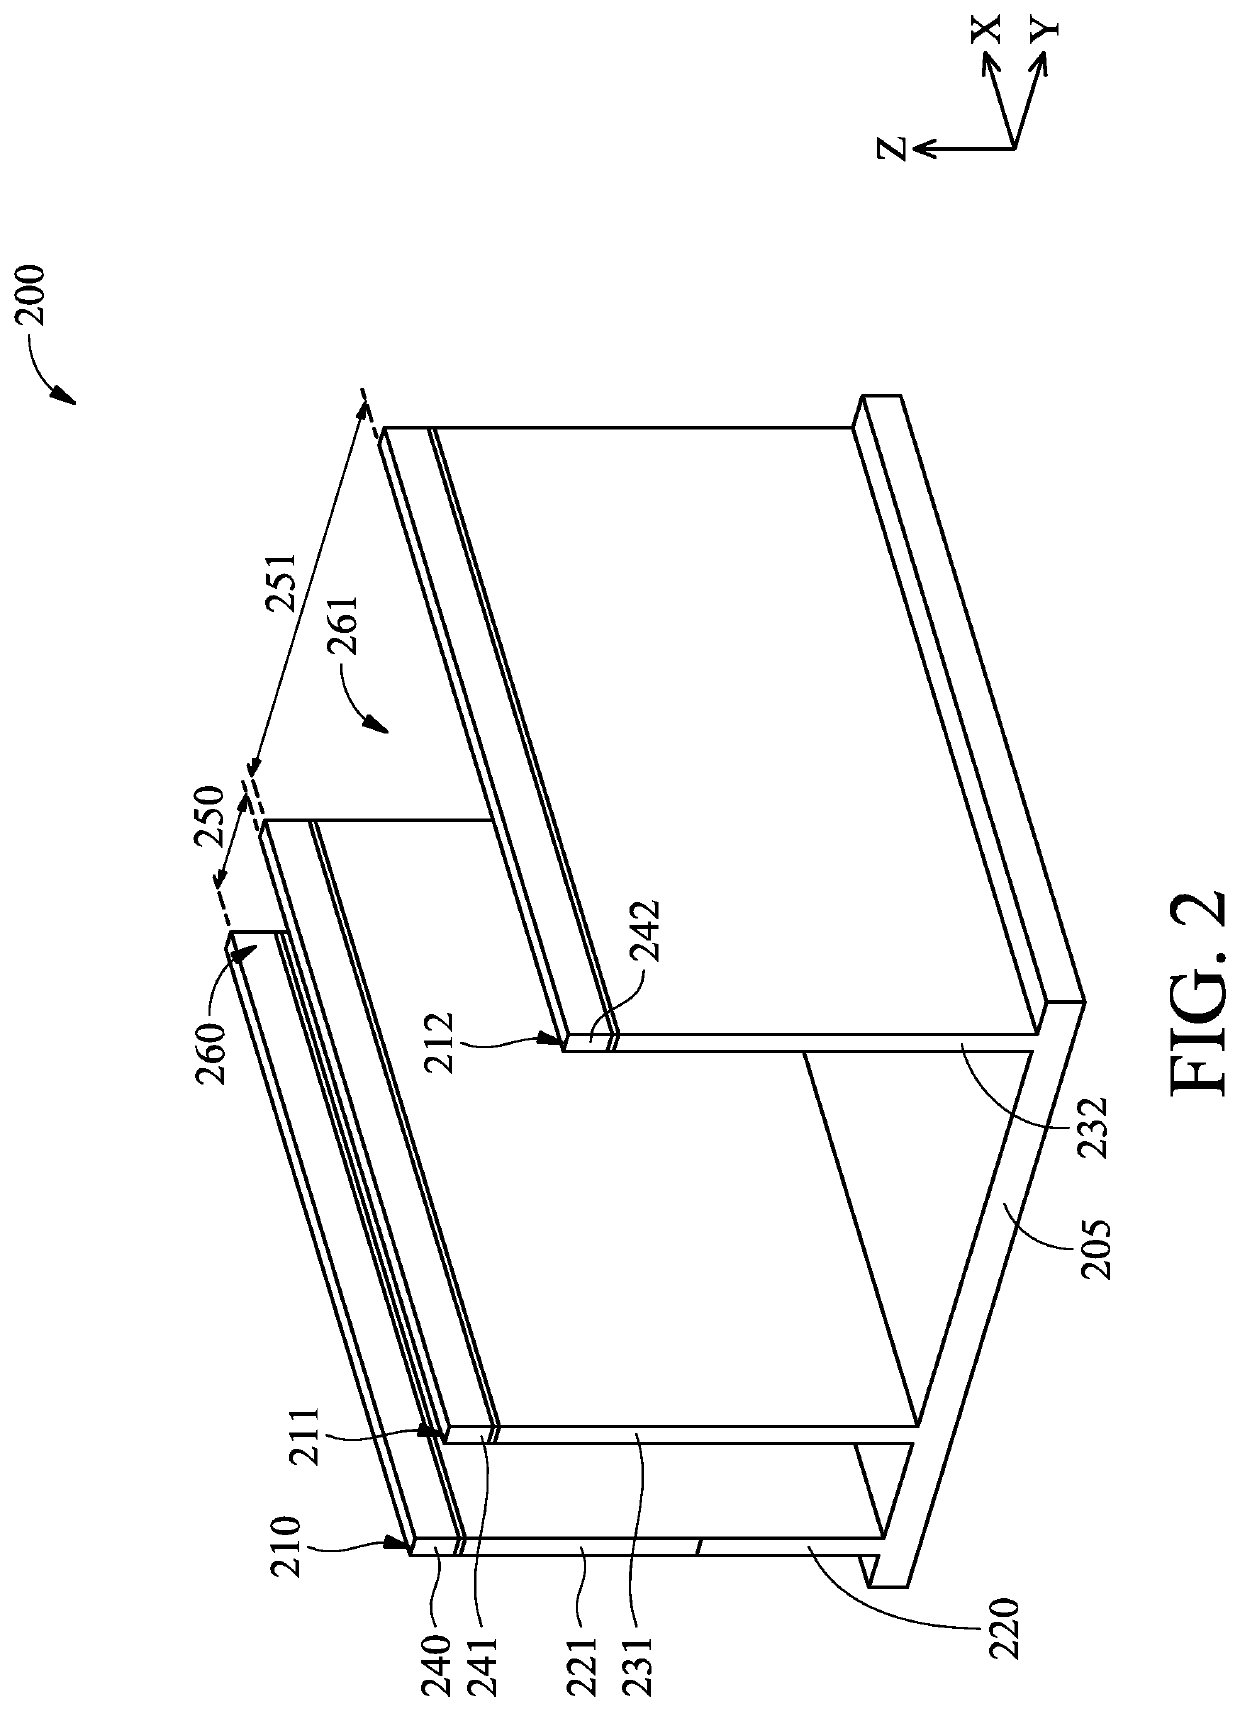 Dummy dielectric fin design for parasitic capacitance reduction